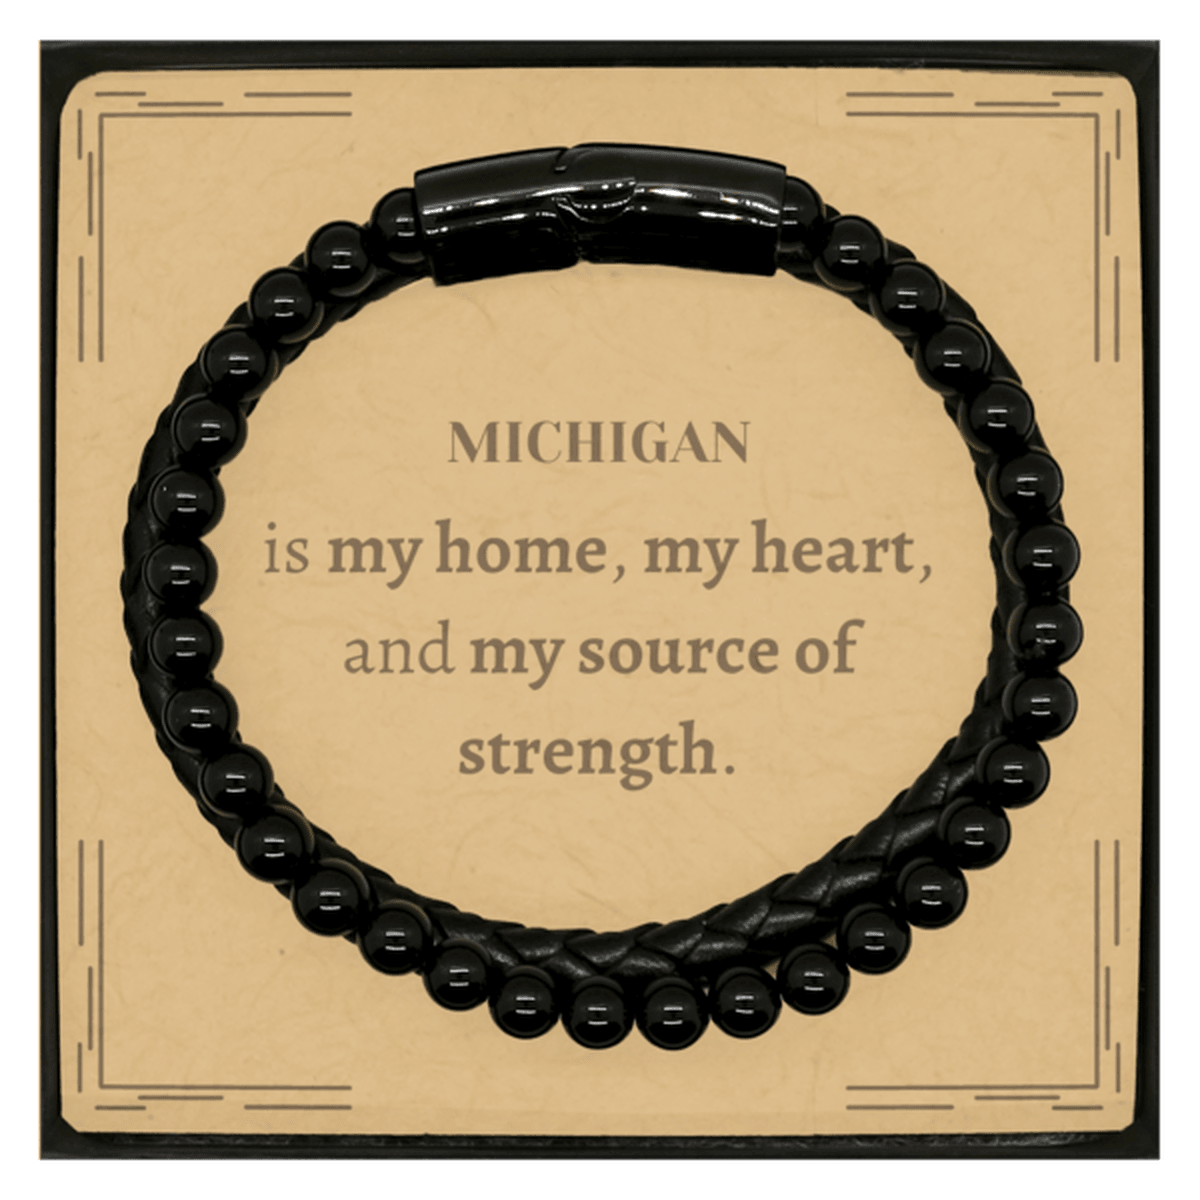 Michigan is my home Gifts, Lovely Michigan Birthday Christmas Stone Leather Bracelets For People from Michigan, Men, Women, Friends - Mallard Moon Gift Shop